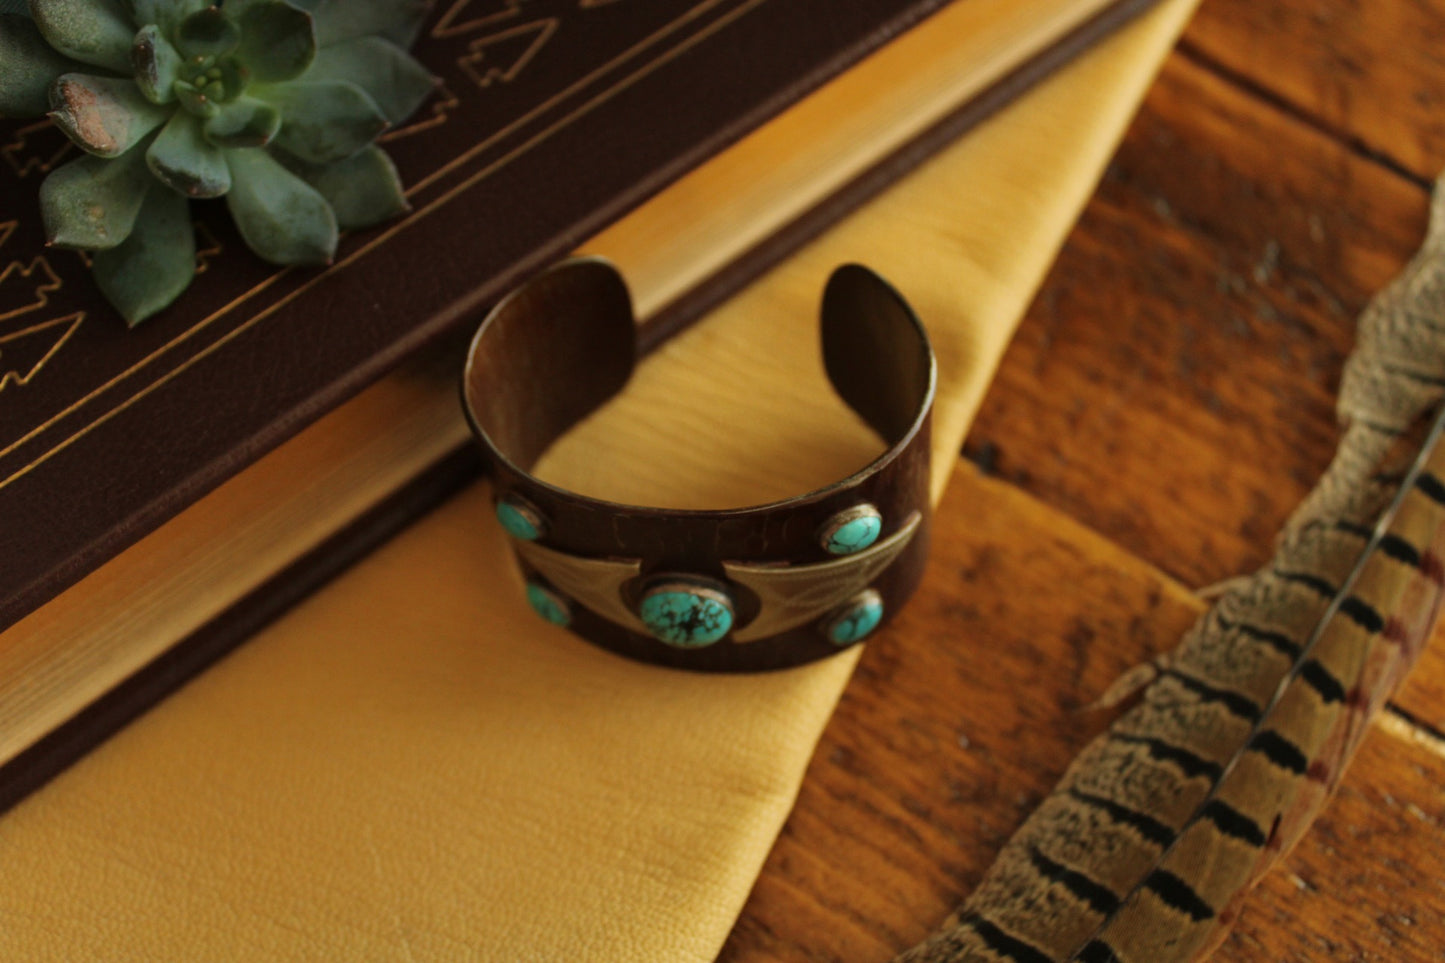 Five Stone Turquoise Cuff With Silver Engraving